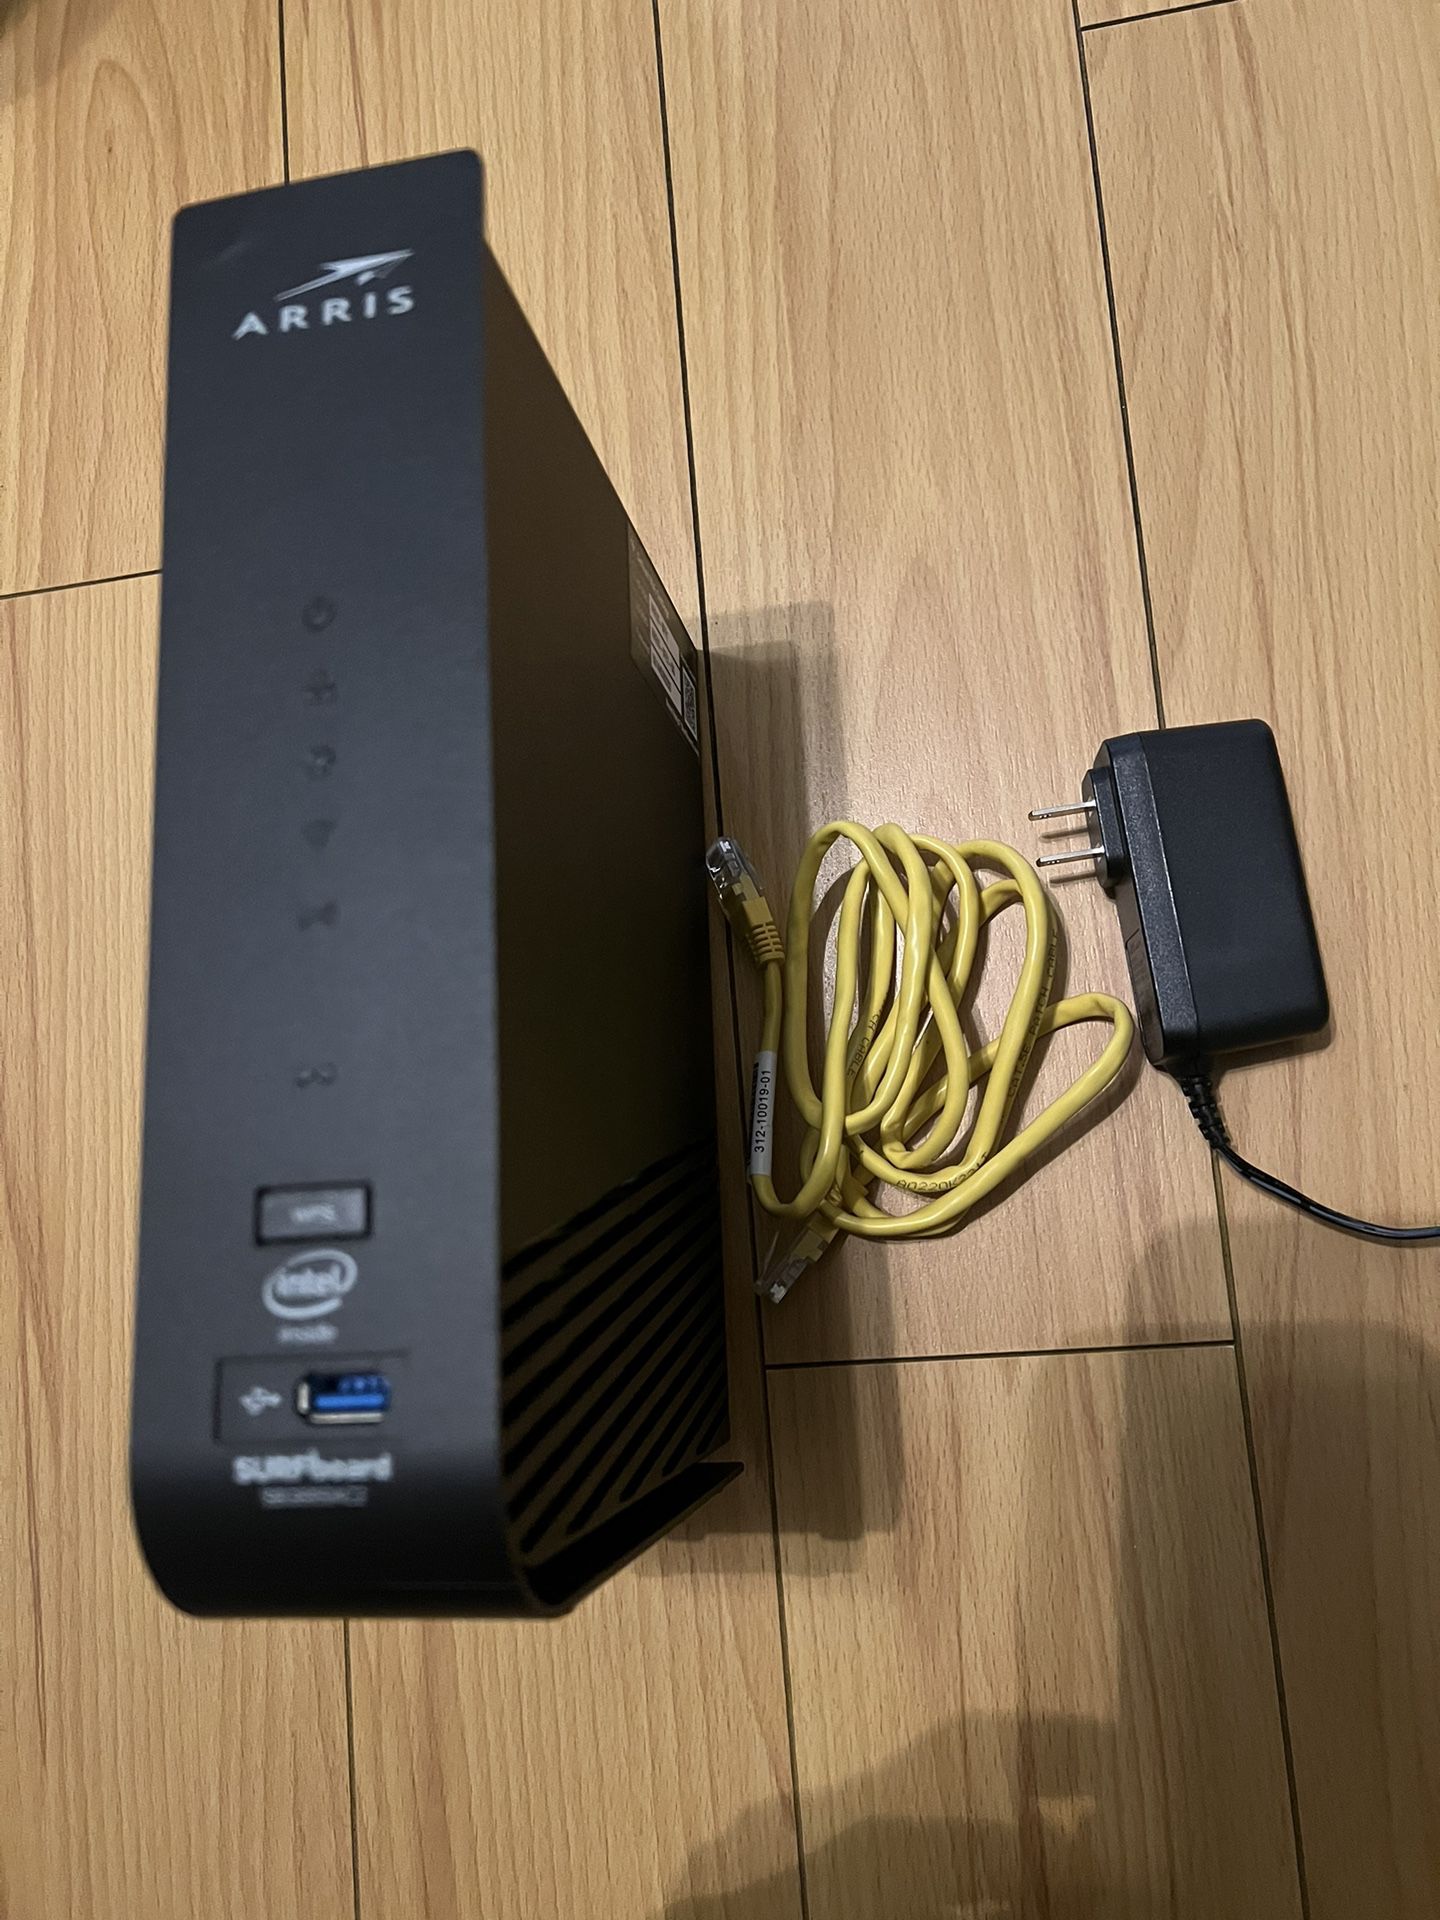 Like New ARRIS Surfboard SBG6950AC2 DOCSIS 3.0 Cable Modem & AC1900 Wi-Fi Router 